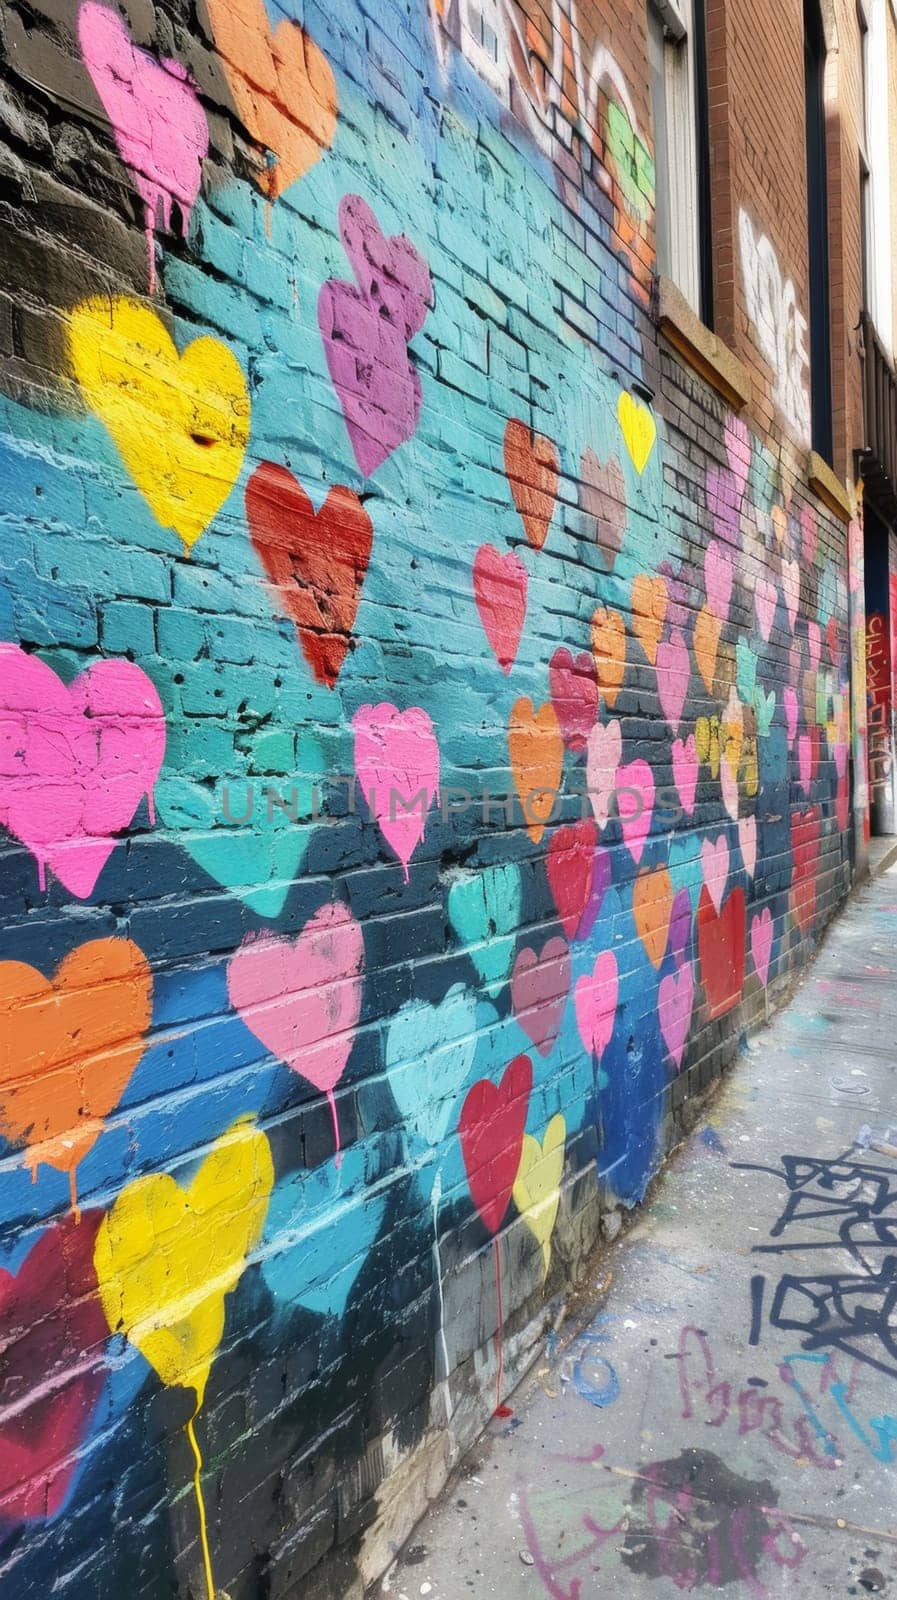 Multi-colored spray painted hearts covering a wall in an alley.